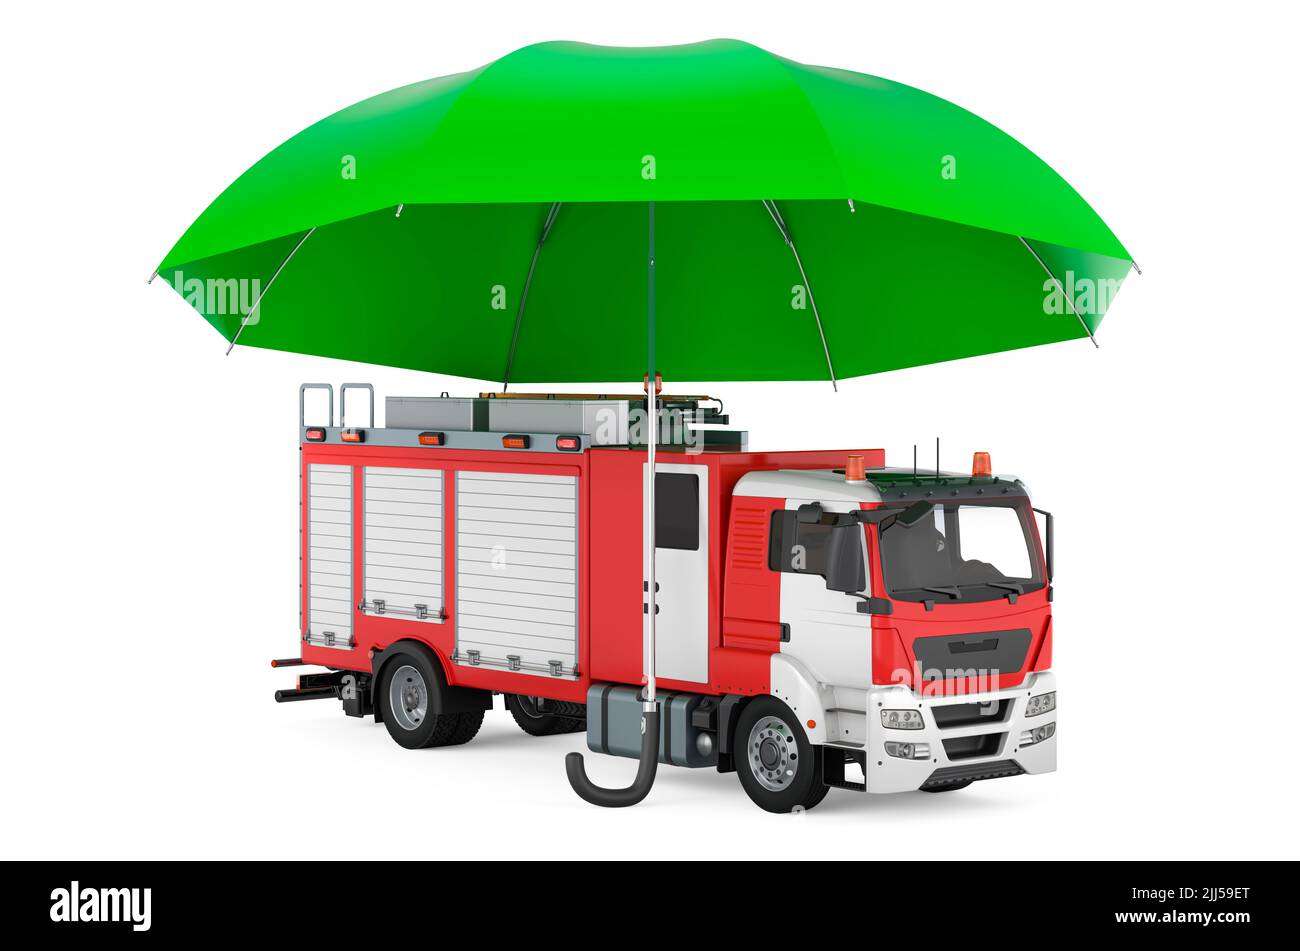 Fire truck under umbrella, 3D rendering isolated on white background Stock Photo